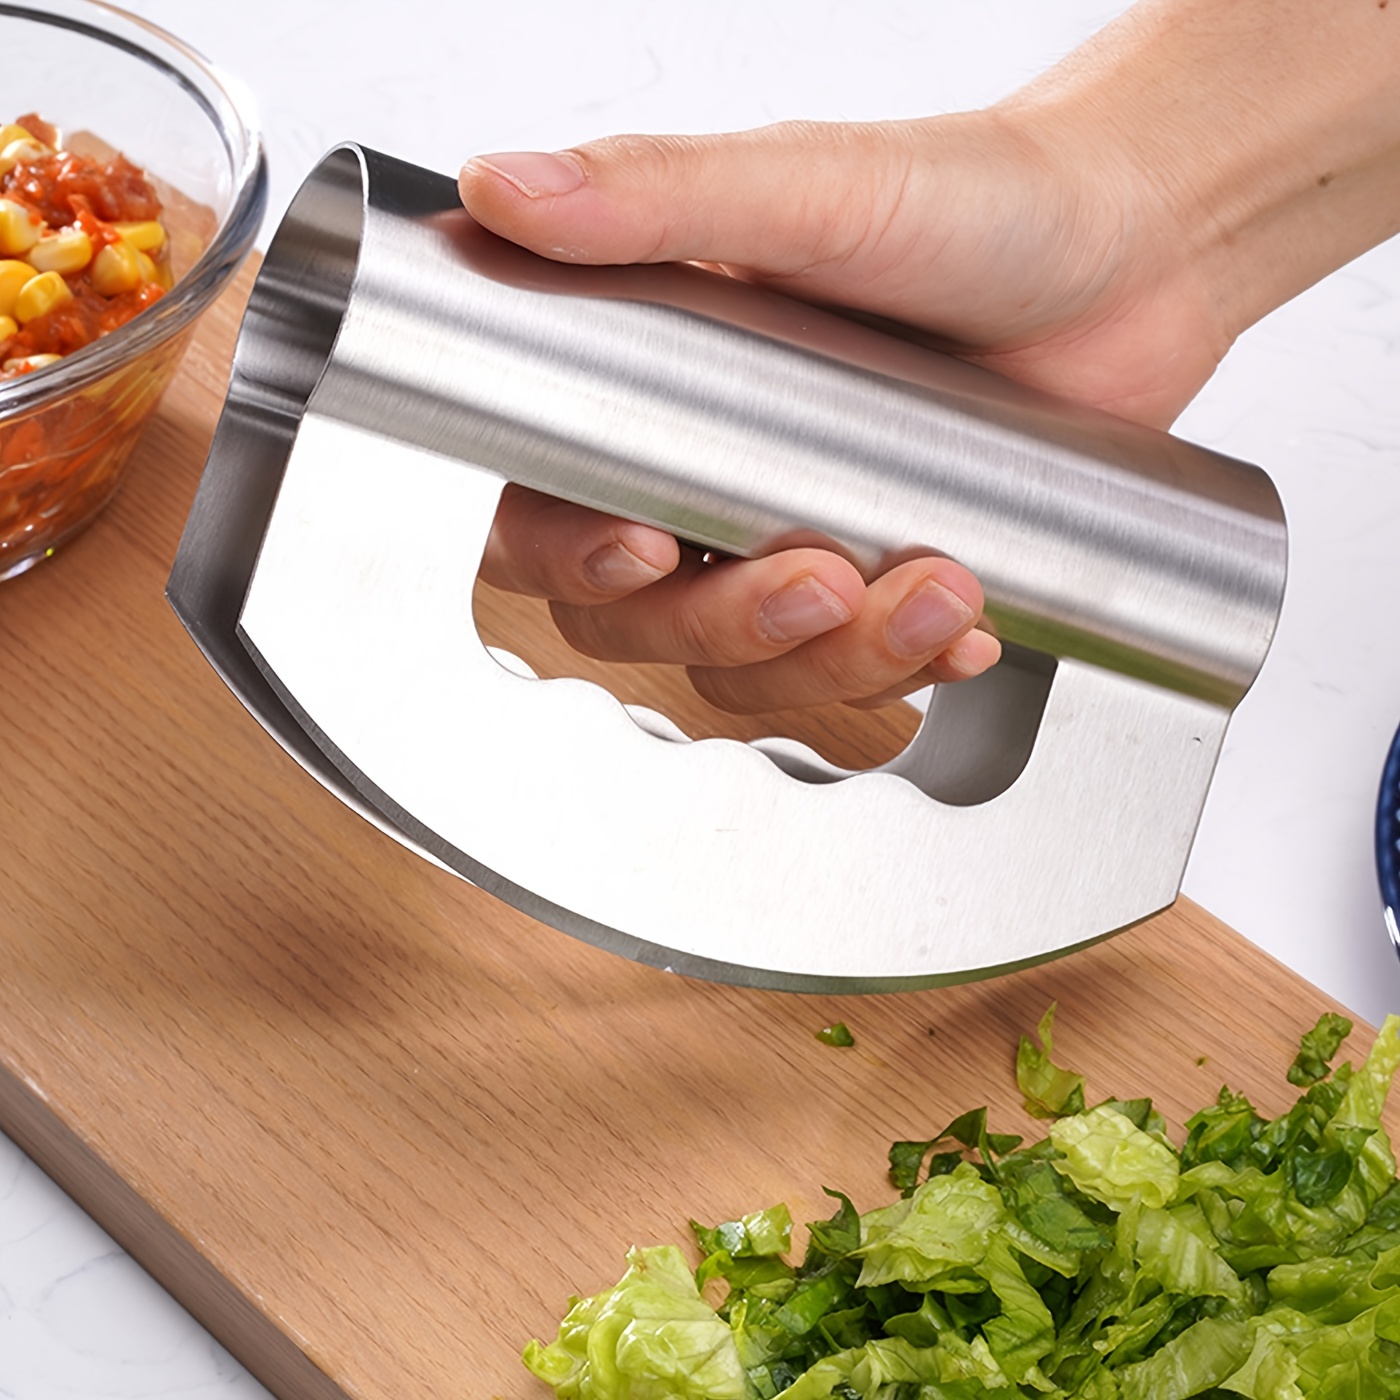 Stainless Steel Vegetable Chopper With Blade Protector - Perfect